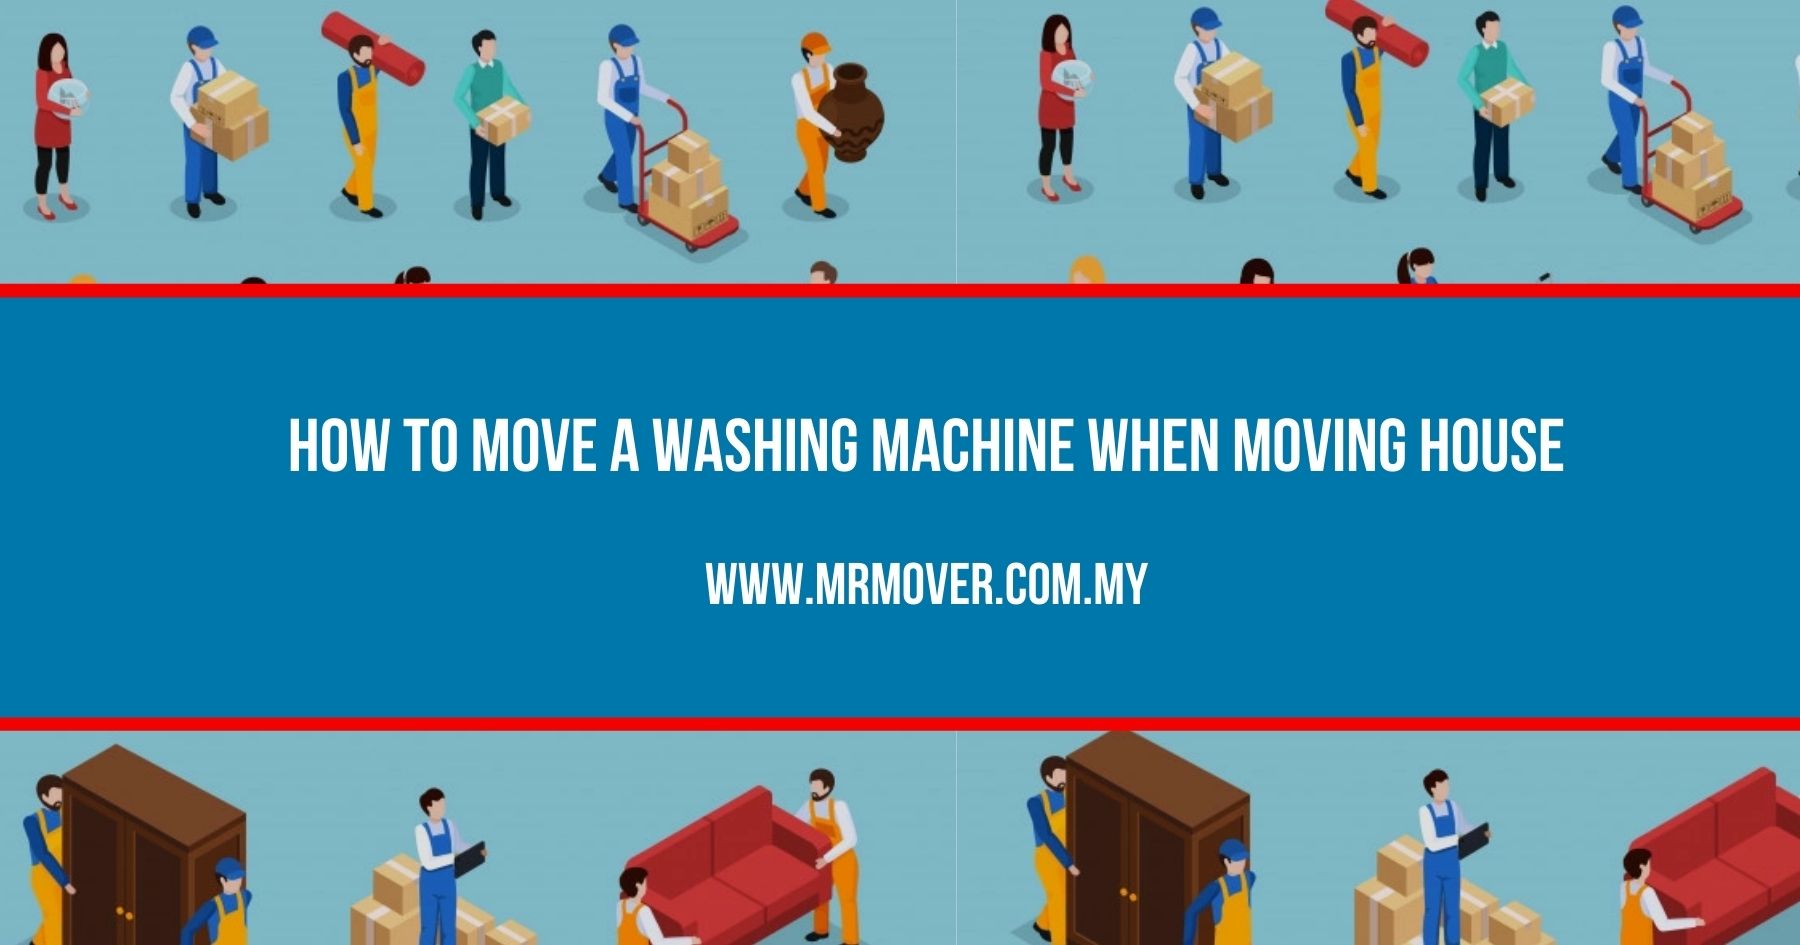 How To Move a Washing Machine When Moving House